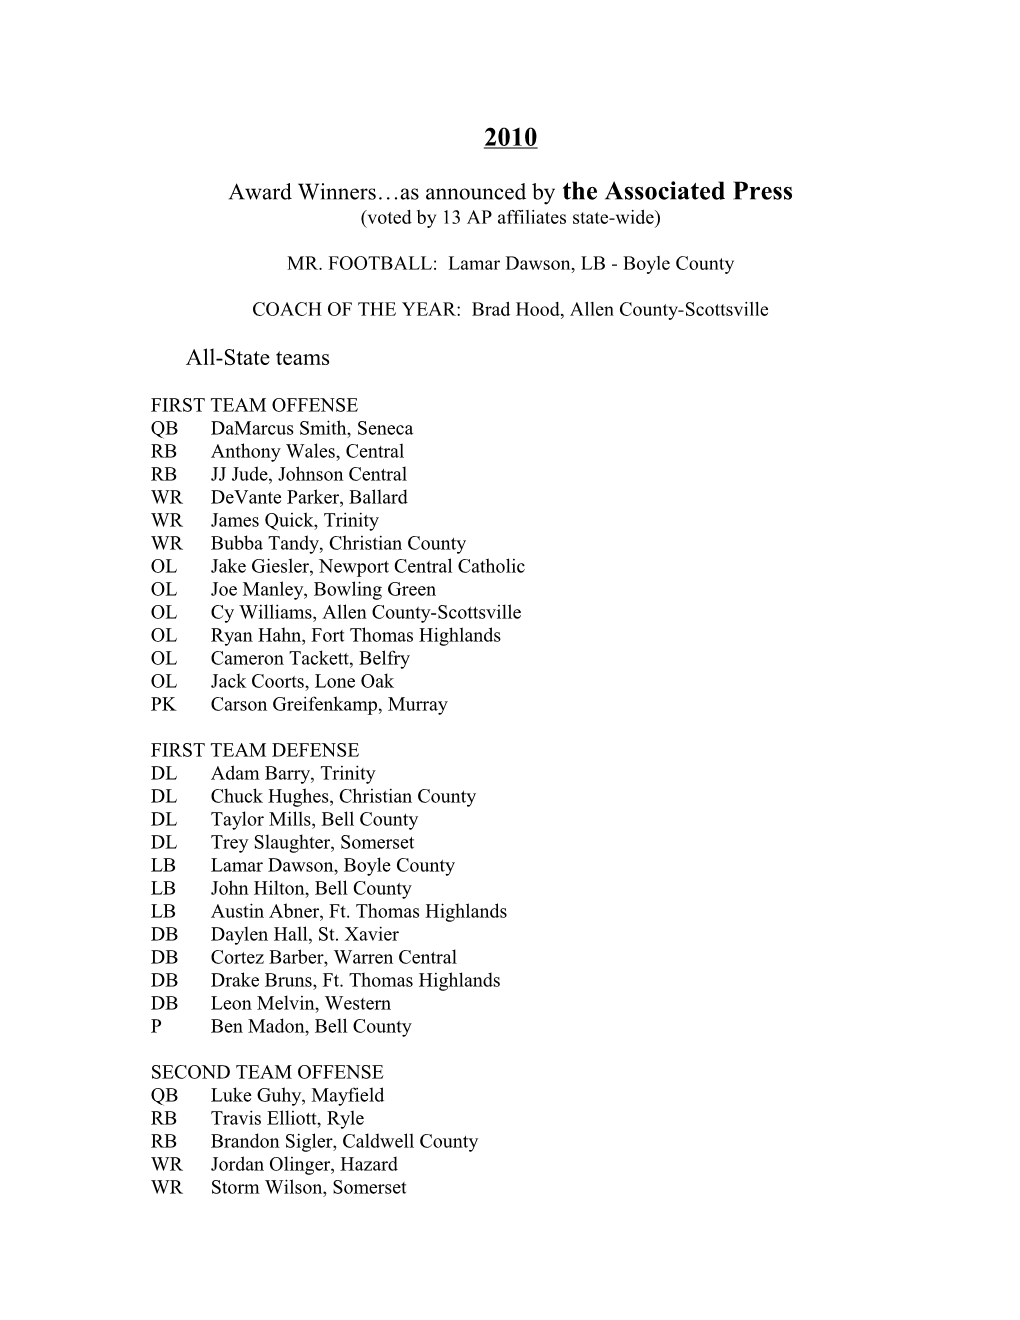 Award Winners As Announced by the Associated Press